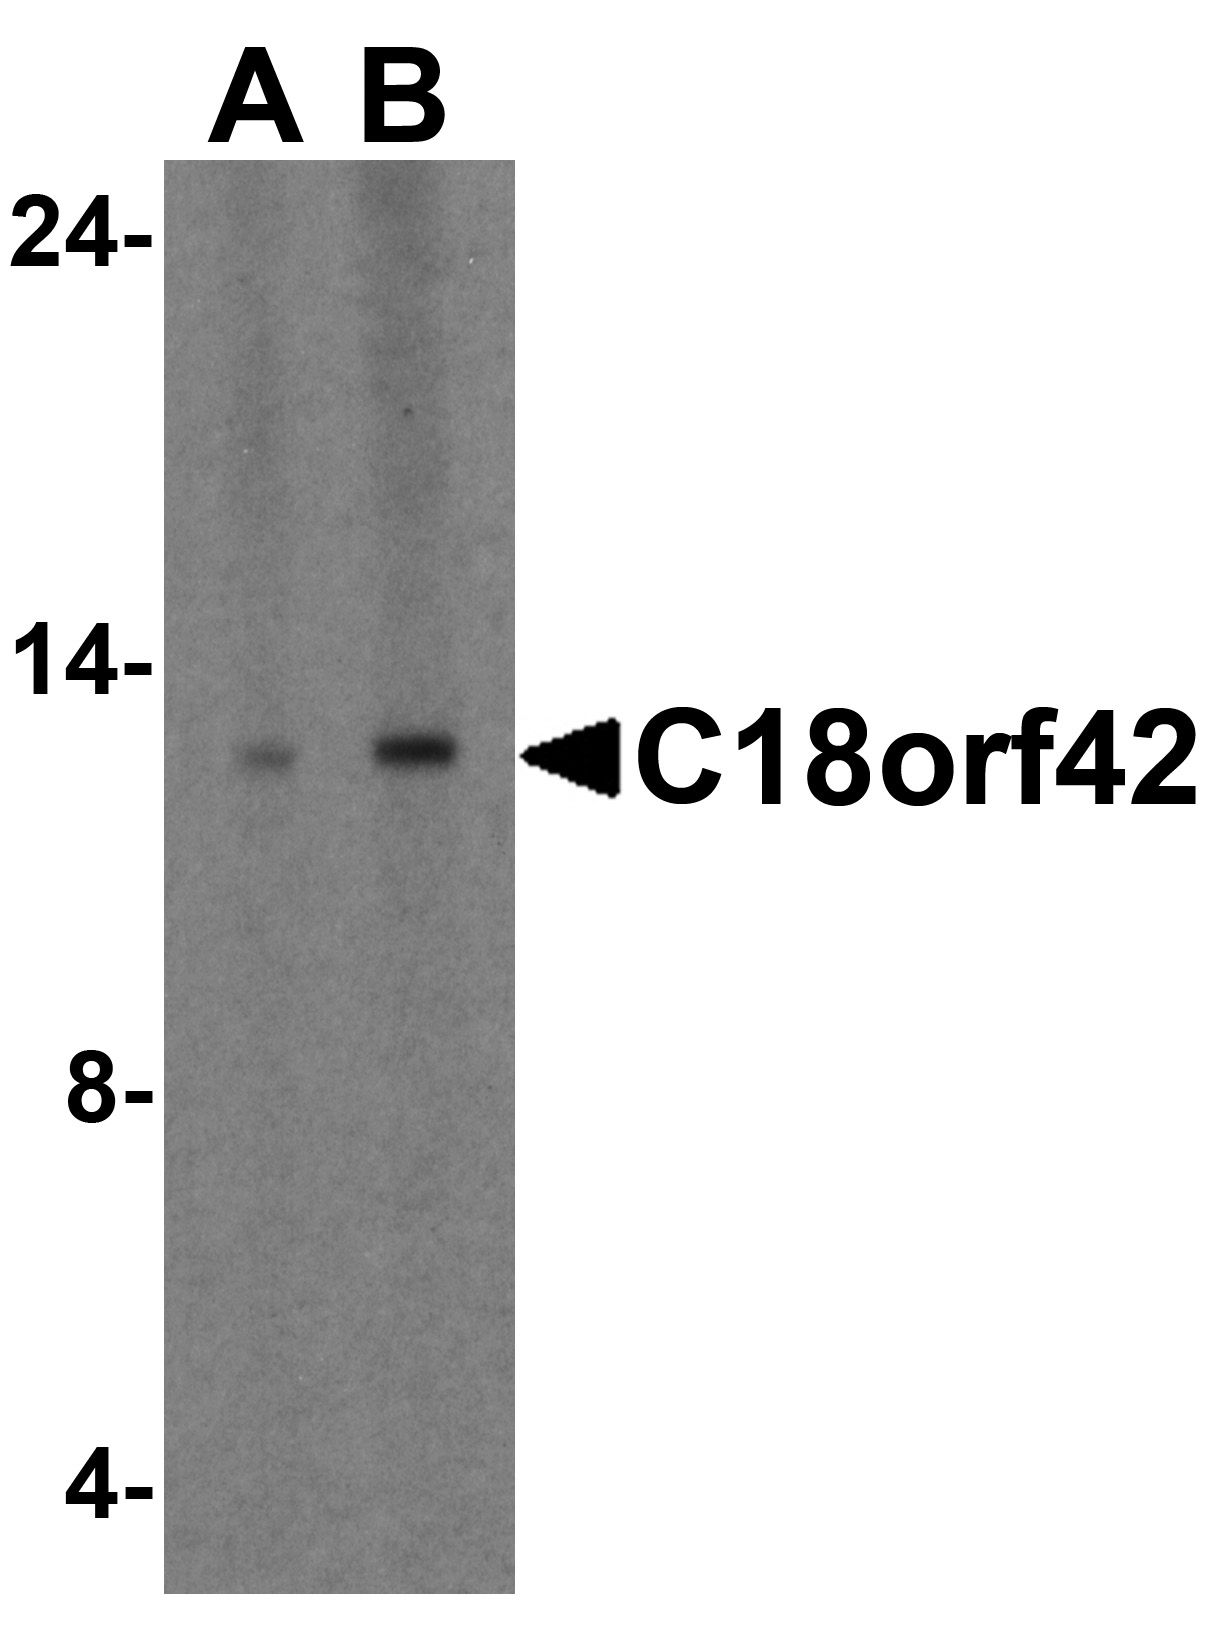 Western blot analysis of C18orf42 in HeLa cell lysate with C18orf42 antibody at 1ug/ml.